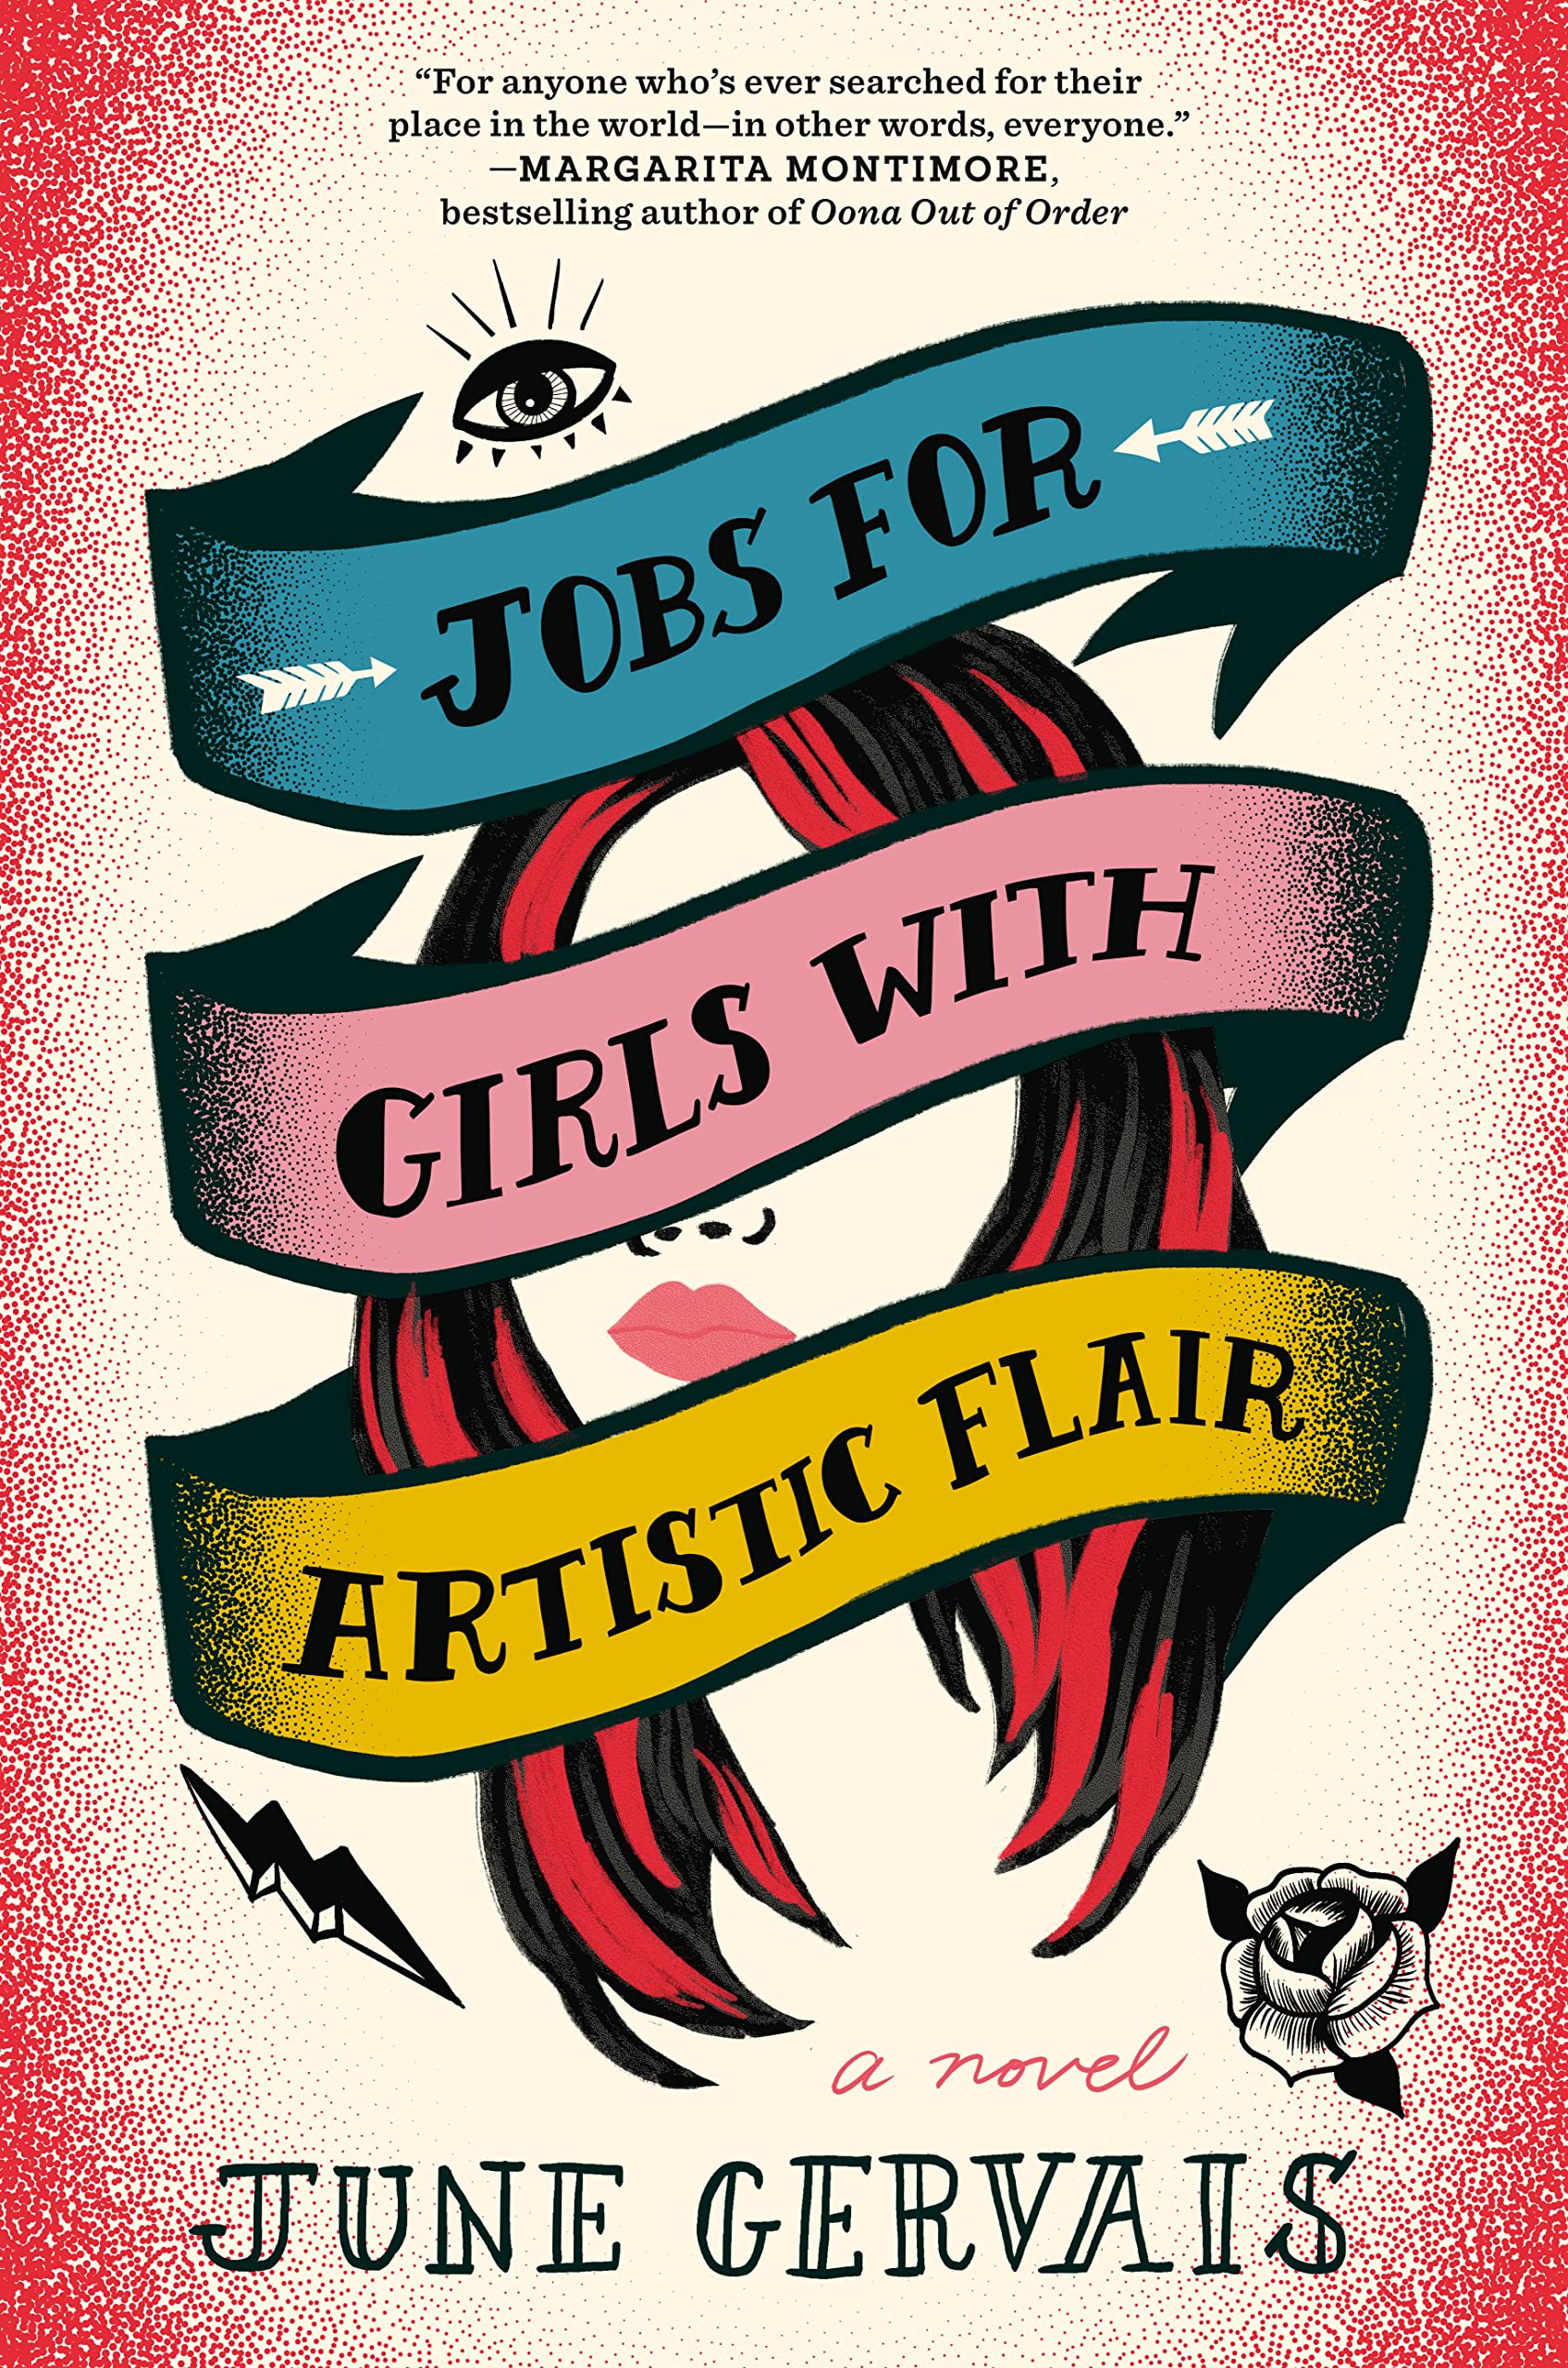 Review: June Gervais’s Jobs for Girls with Artistic Flair